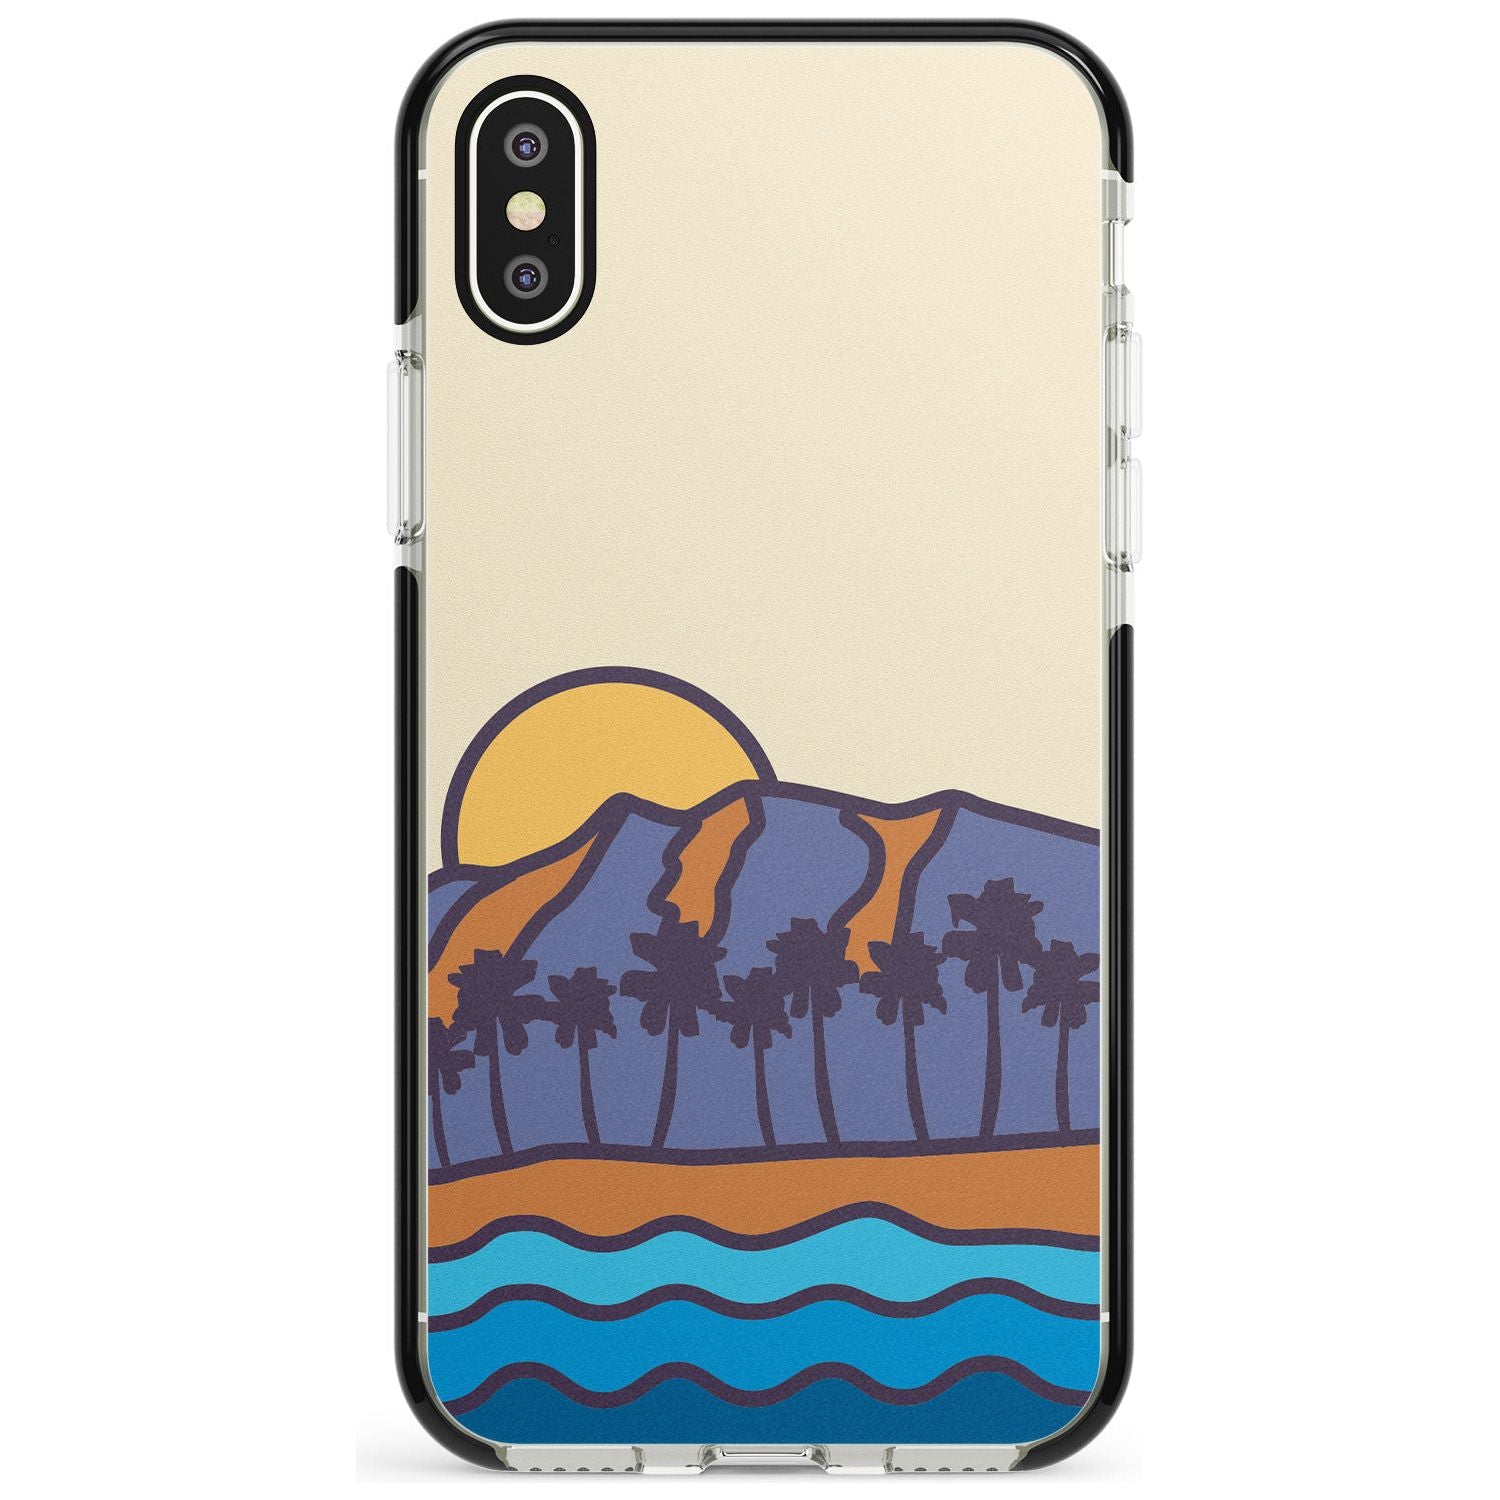 South Sunset Pink Fade Impact Phone Case for iPhone X XS Max XR